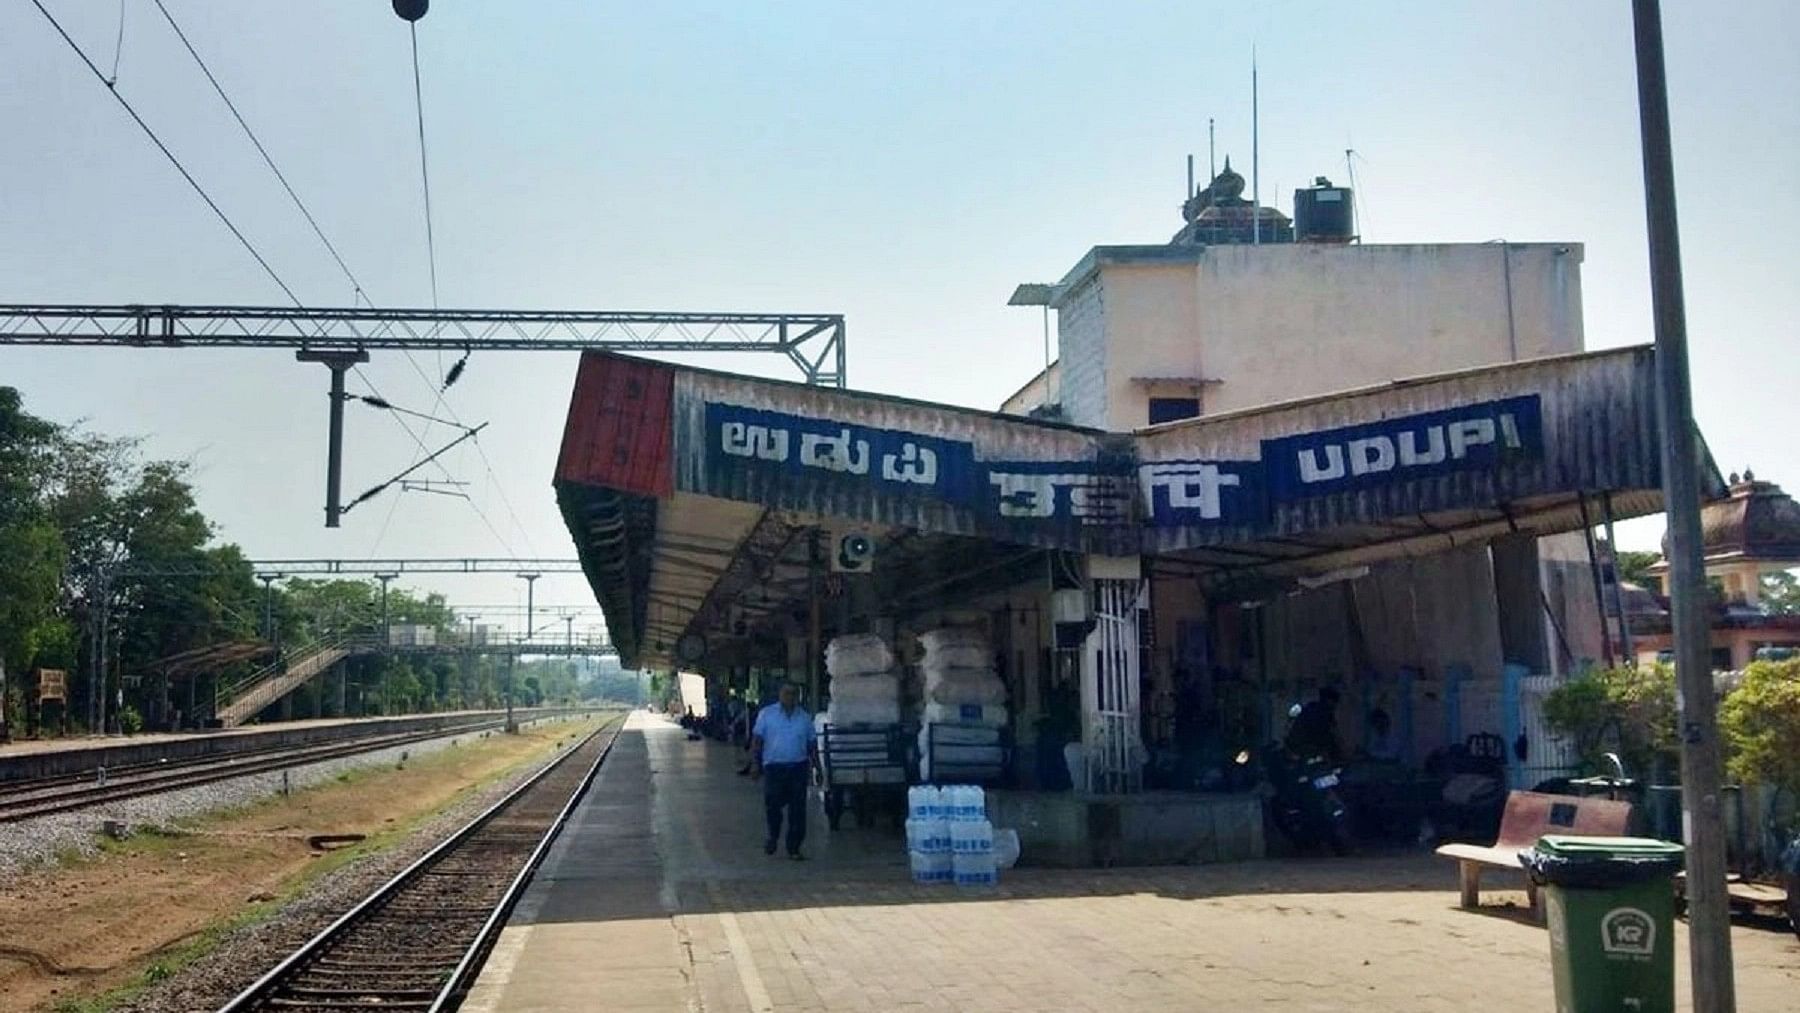 Udupi railway station, is miles behind in providing basic facilities to thousands of passengers visiting the railway station.